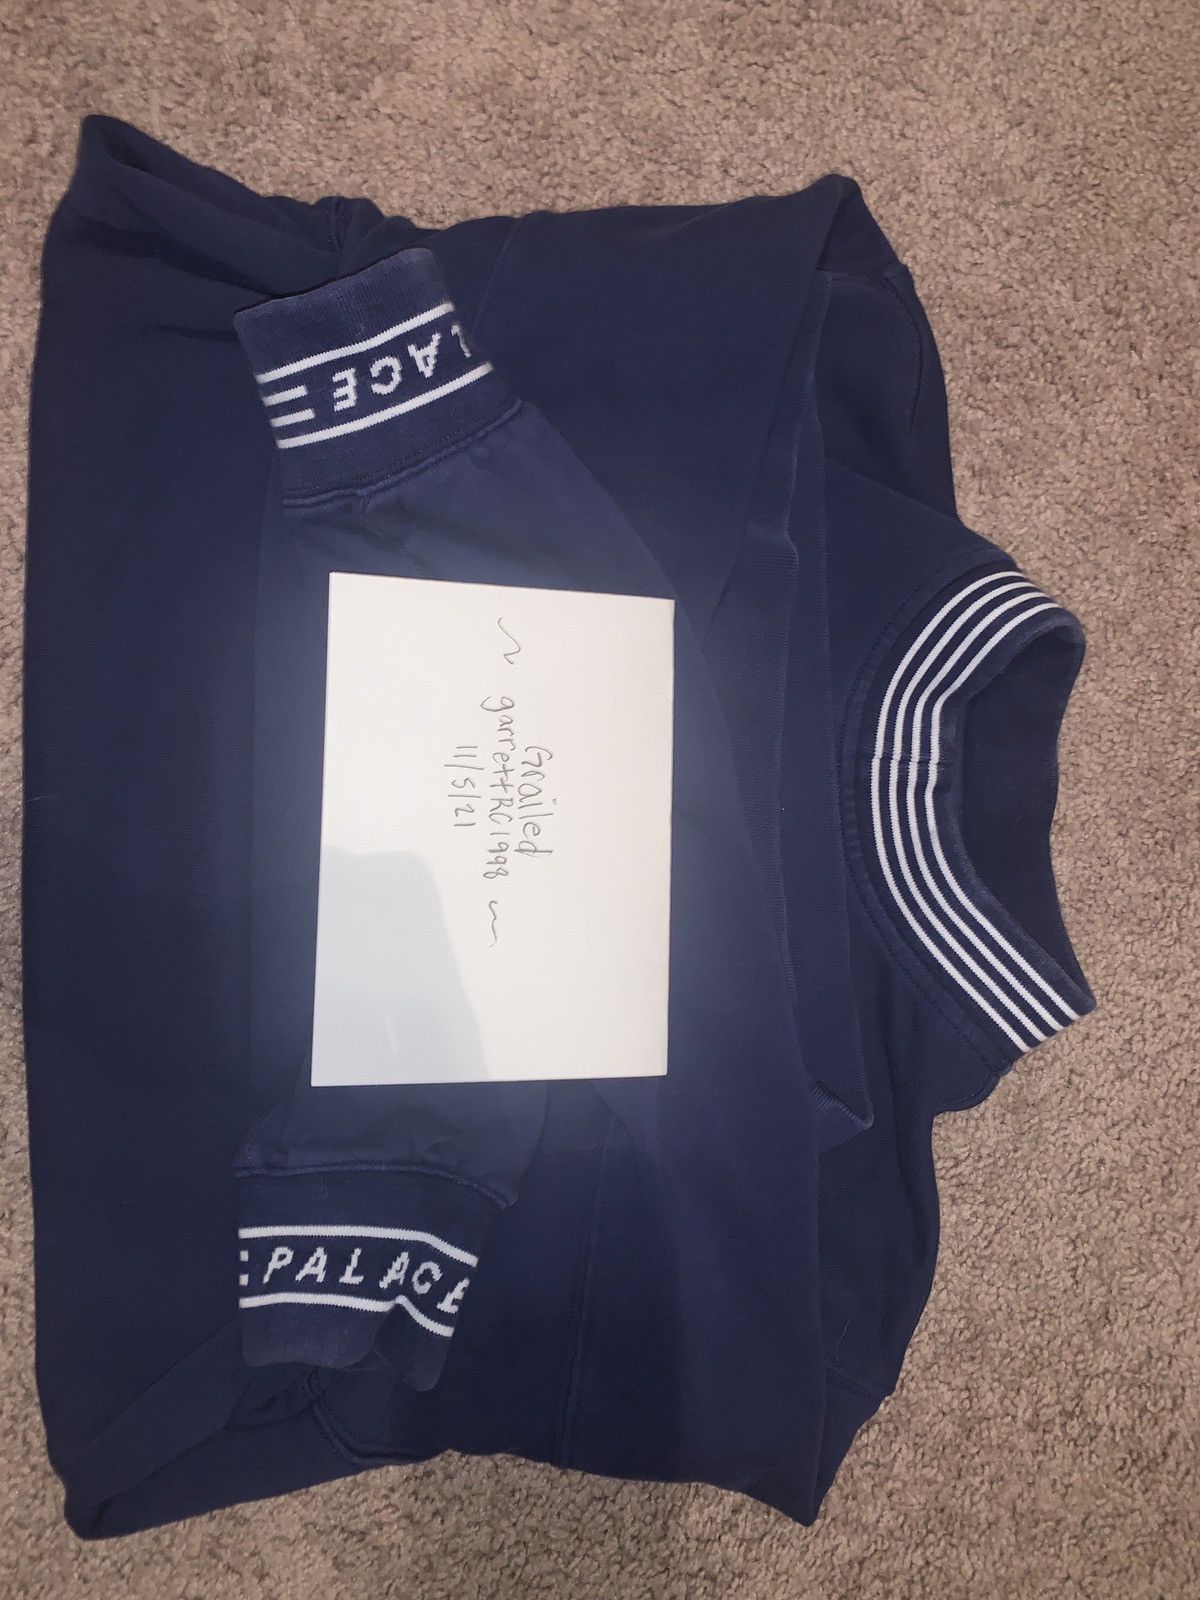 Palace Palace pullover sweater Size US S / EU 44-46 / 1 - 6 Preview